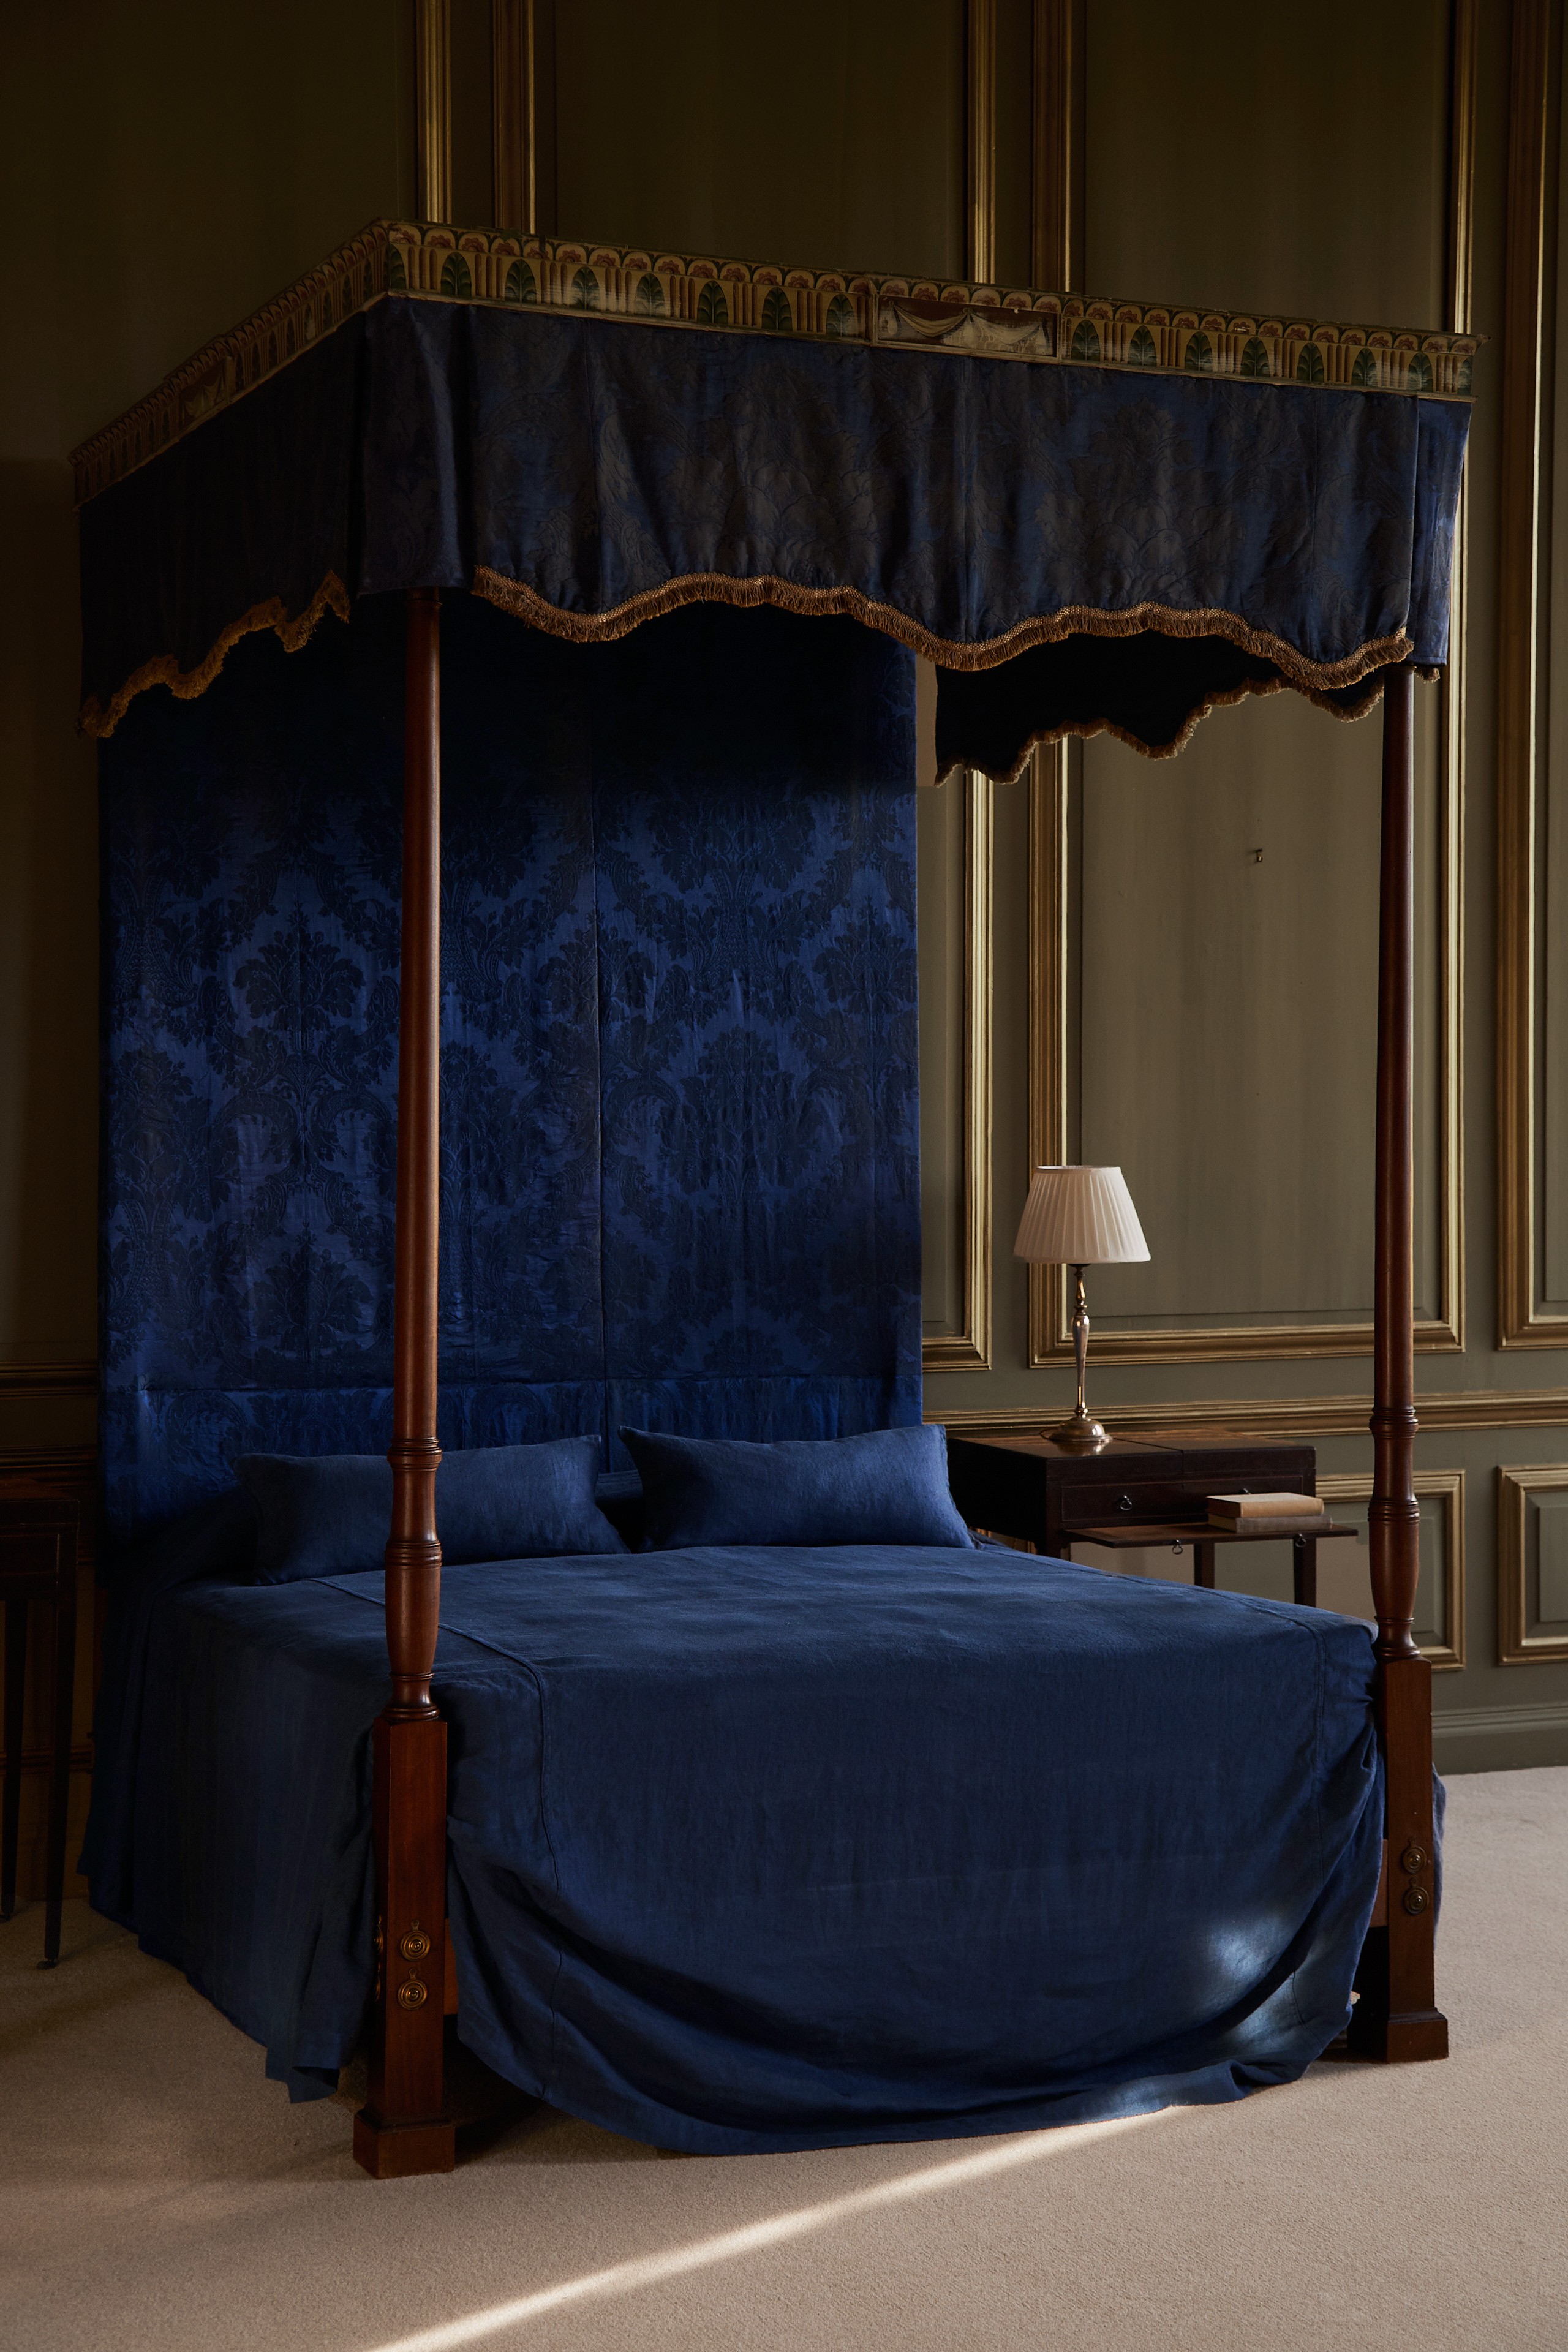 a canopy bed with a blue cover and pillows